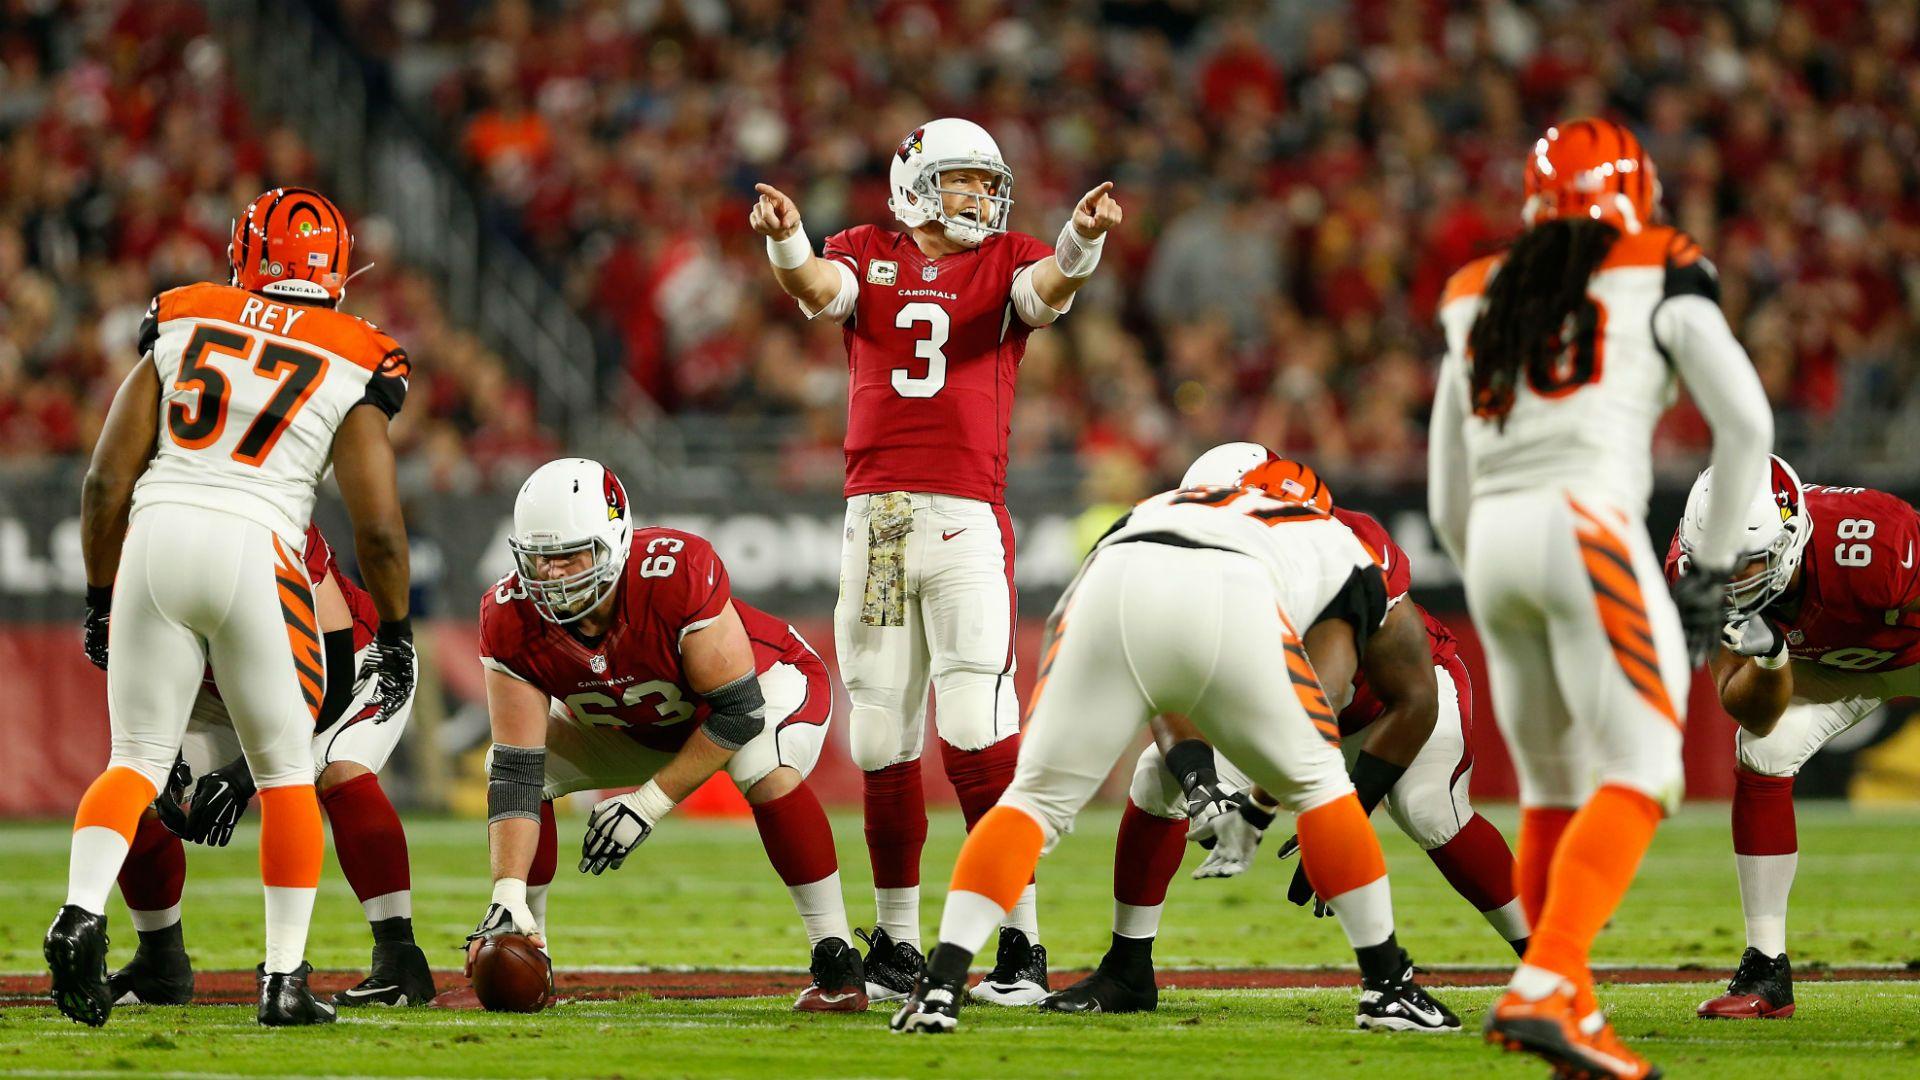 Carson Palmer settles score with Bengals, throws four TDs